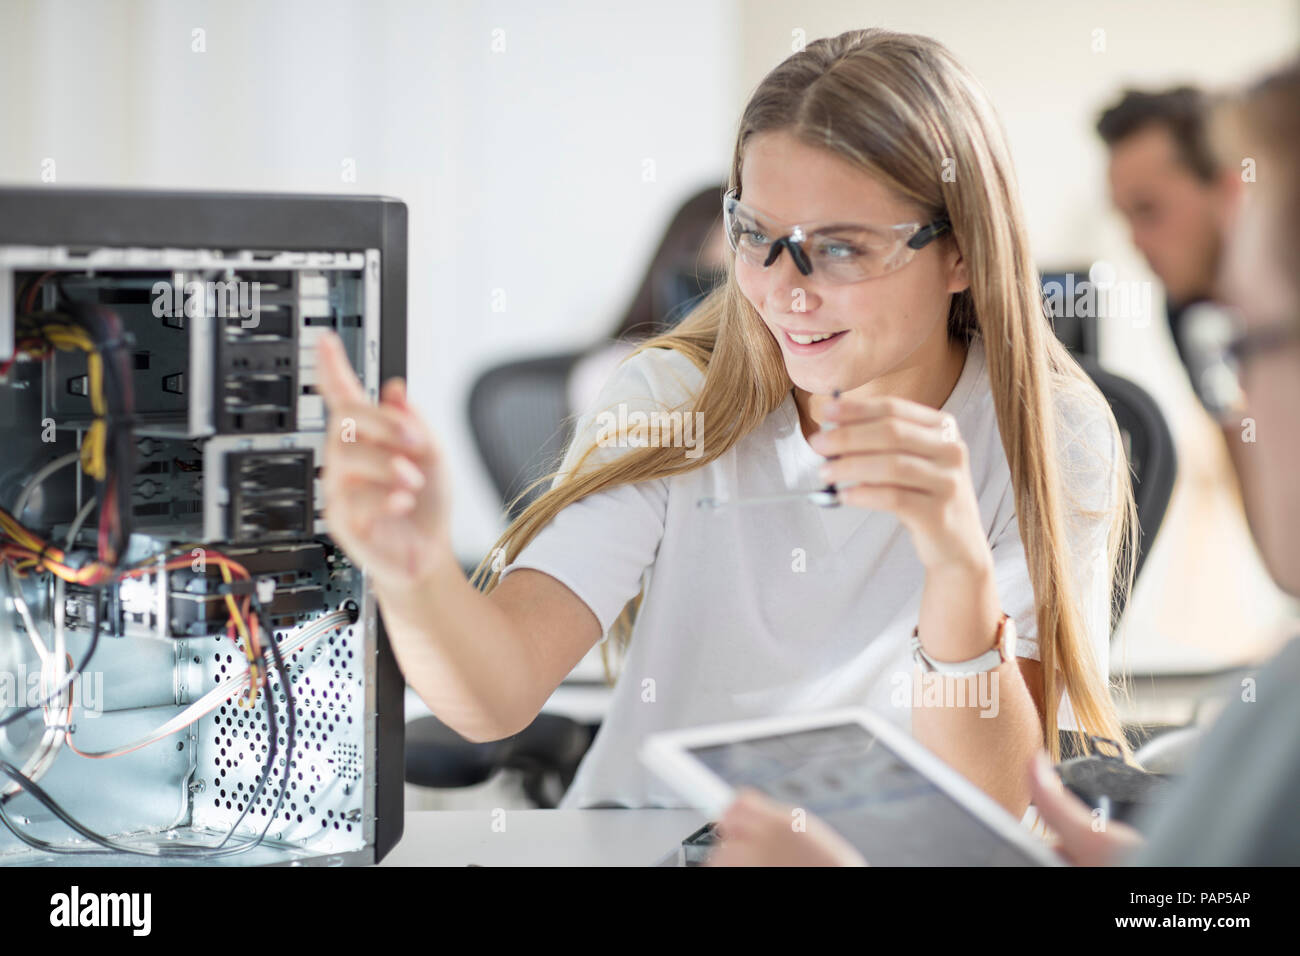 Students assembling computer in class Stock Photo